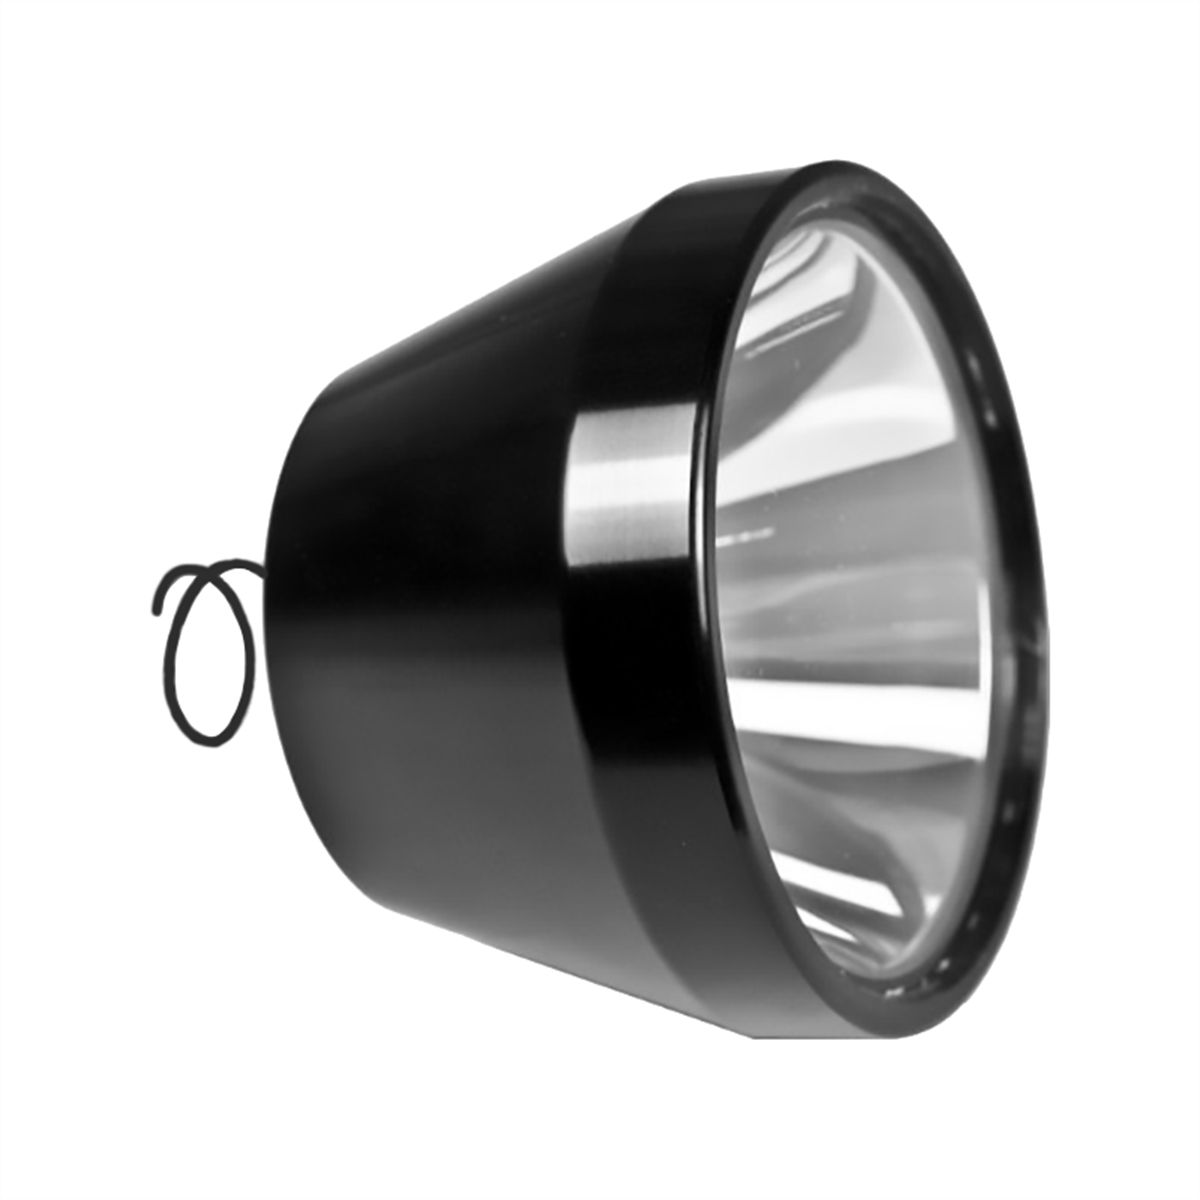 LENS / REFLECTOR FOR HP